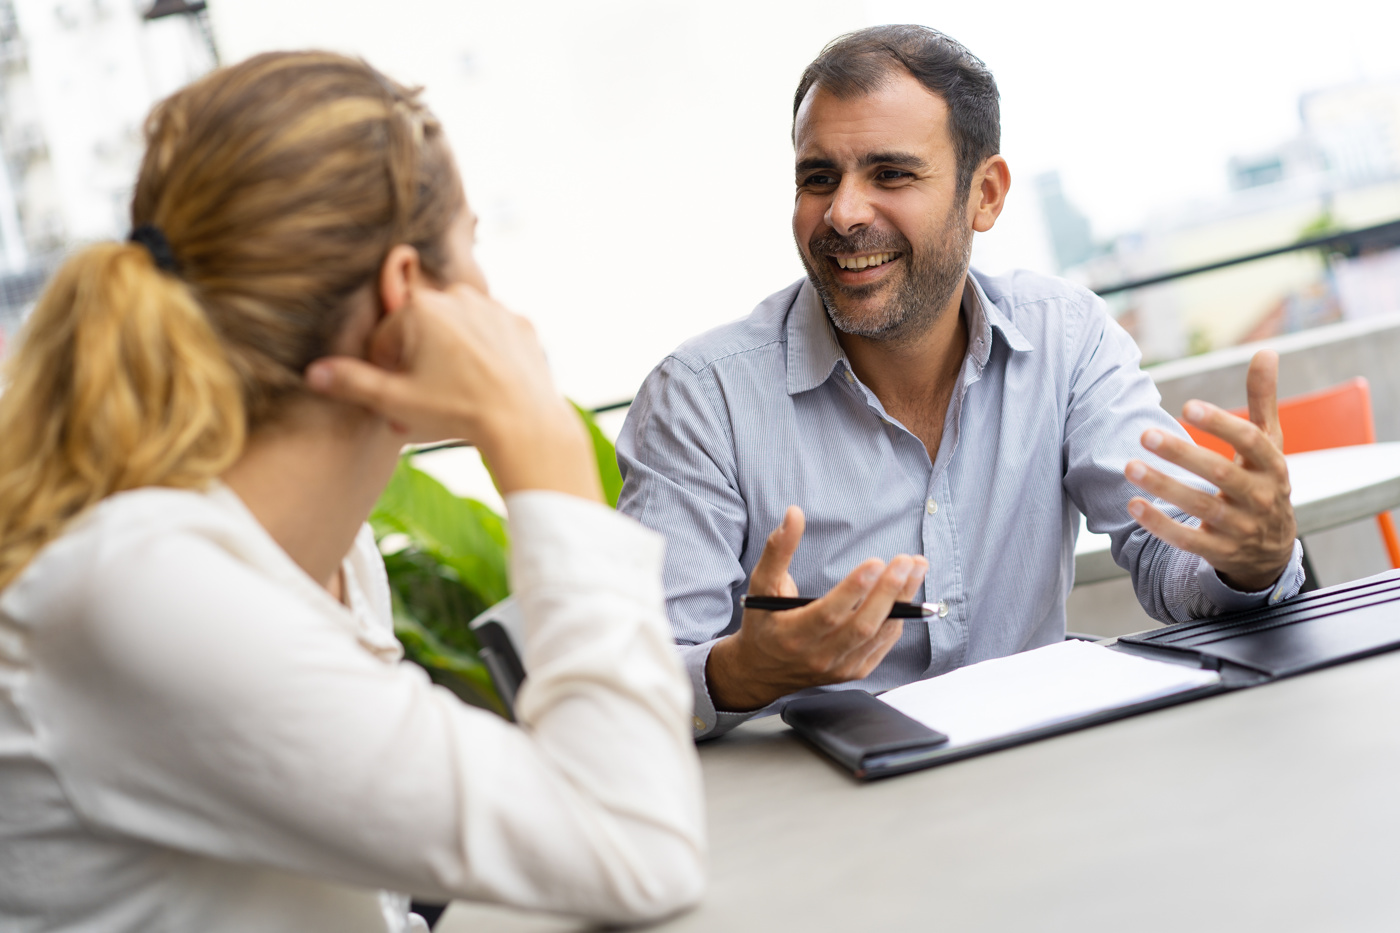 A financial advisor with an IAF degree advises a client on her wealth accumulation.